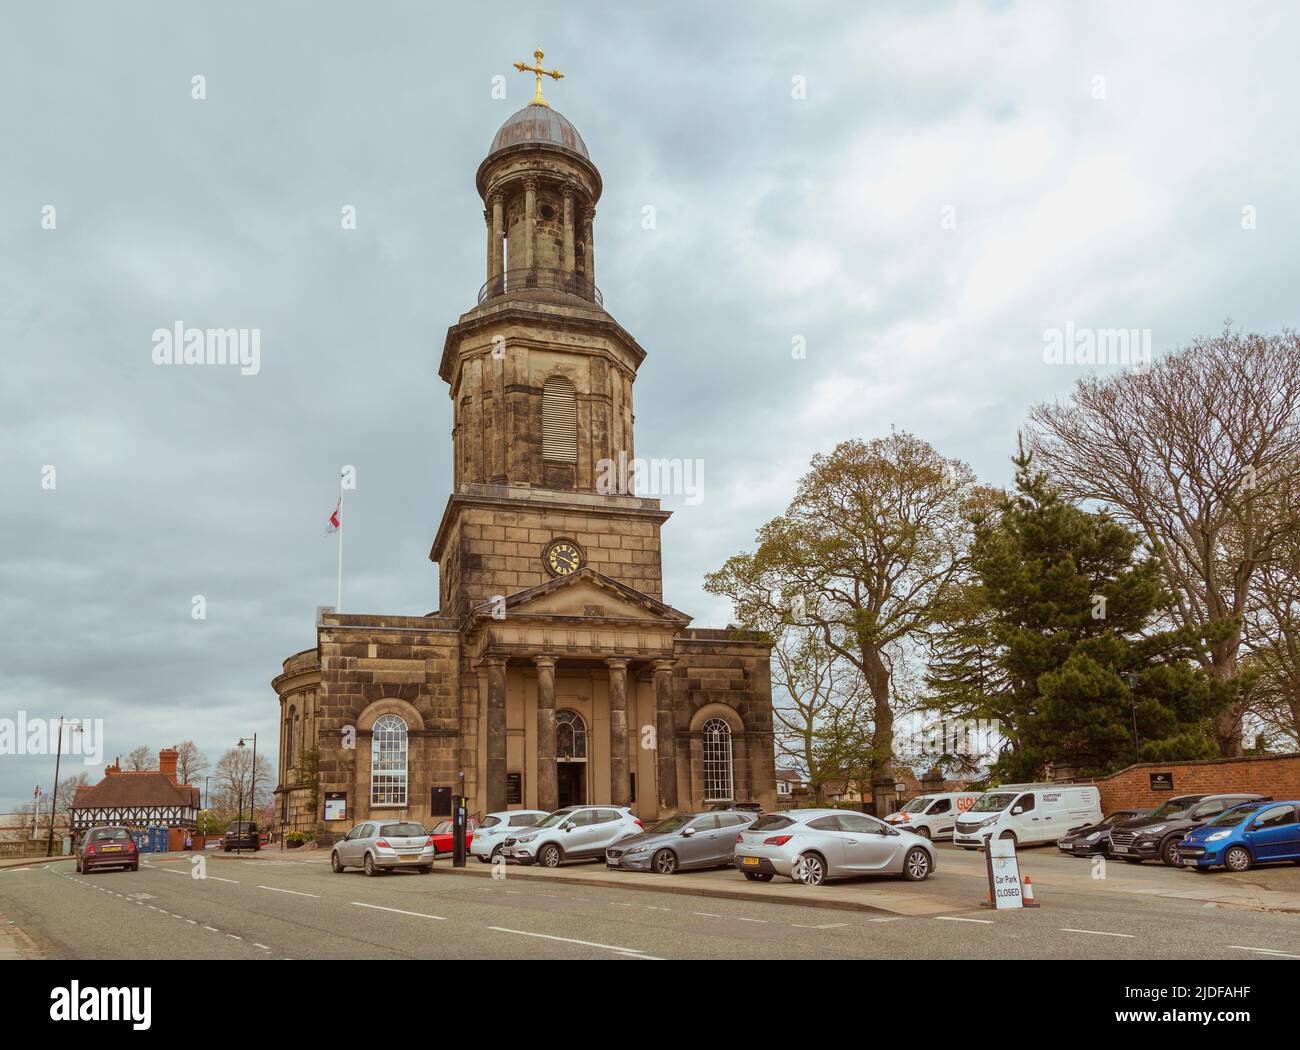 St Chads church in Shrewsbury, provides a distinctive landmark in the town. It is the church where Charles Darwin was baptised in 1809. Stock Photo